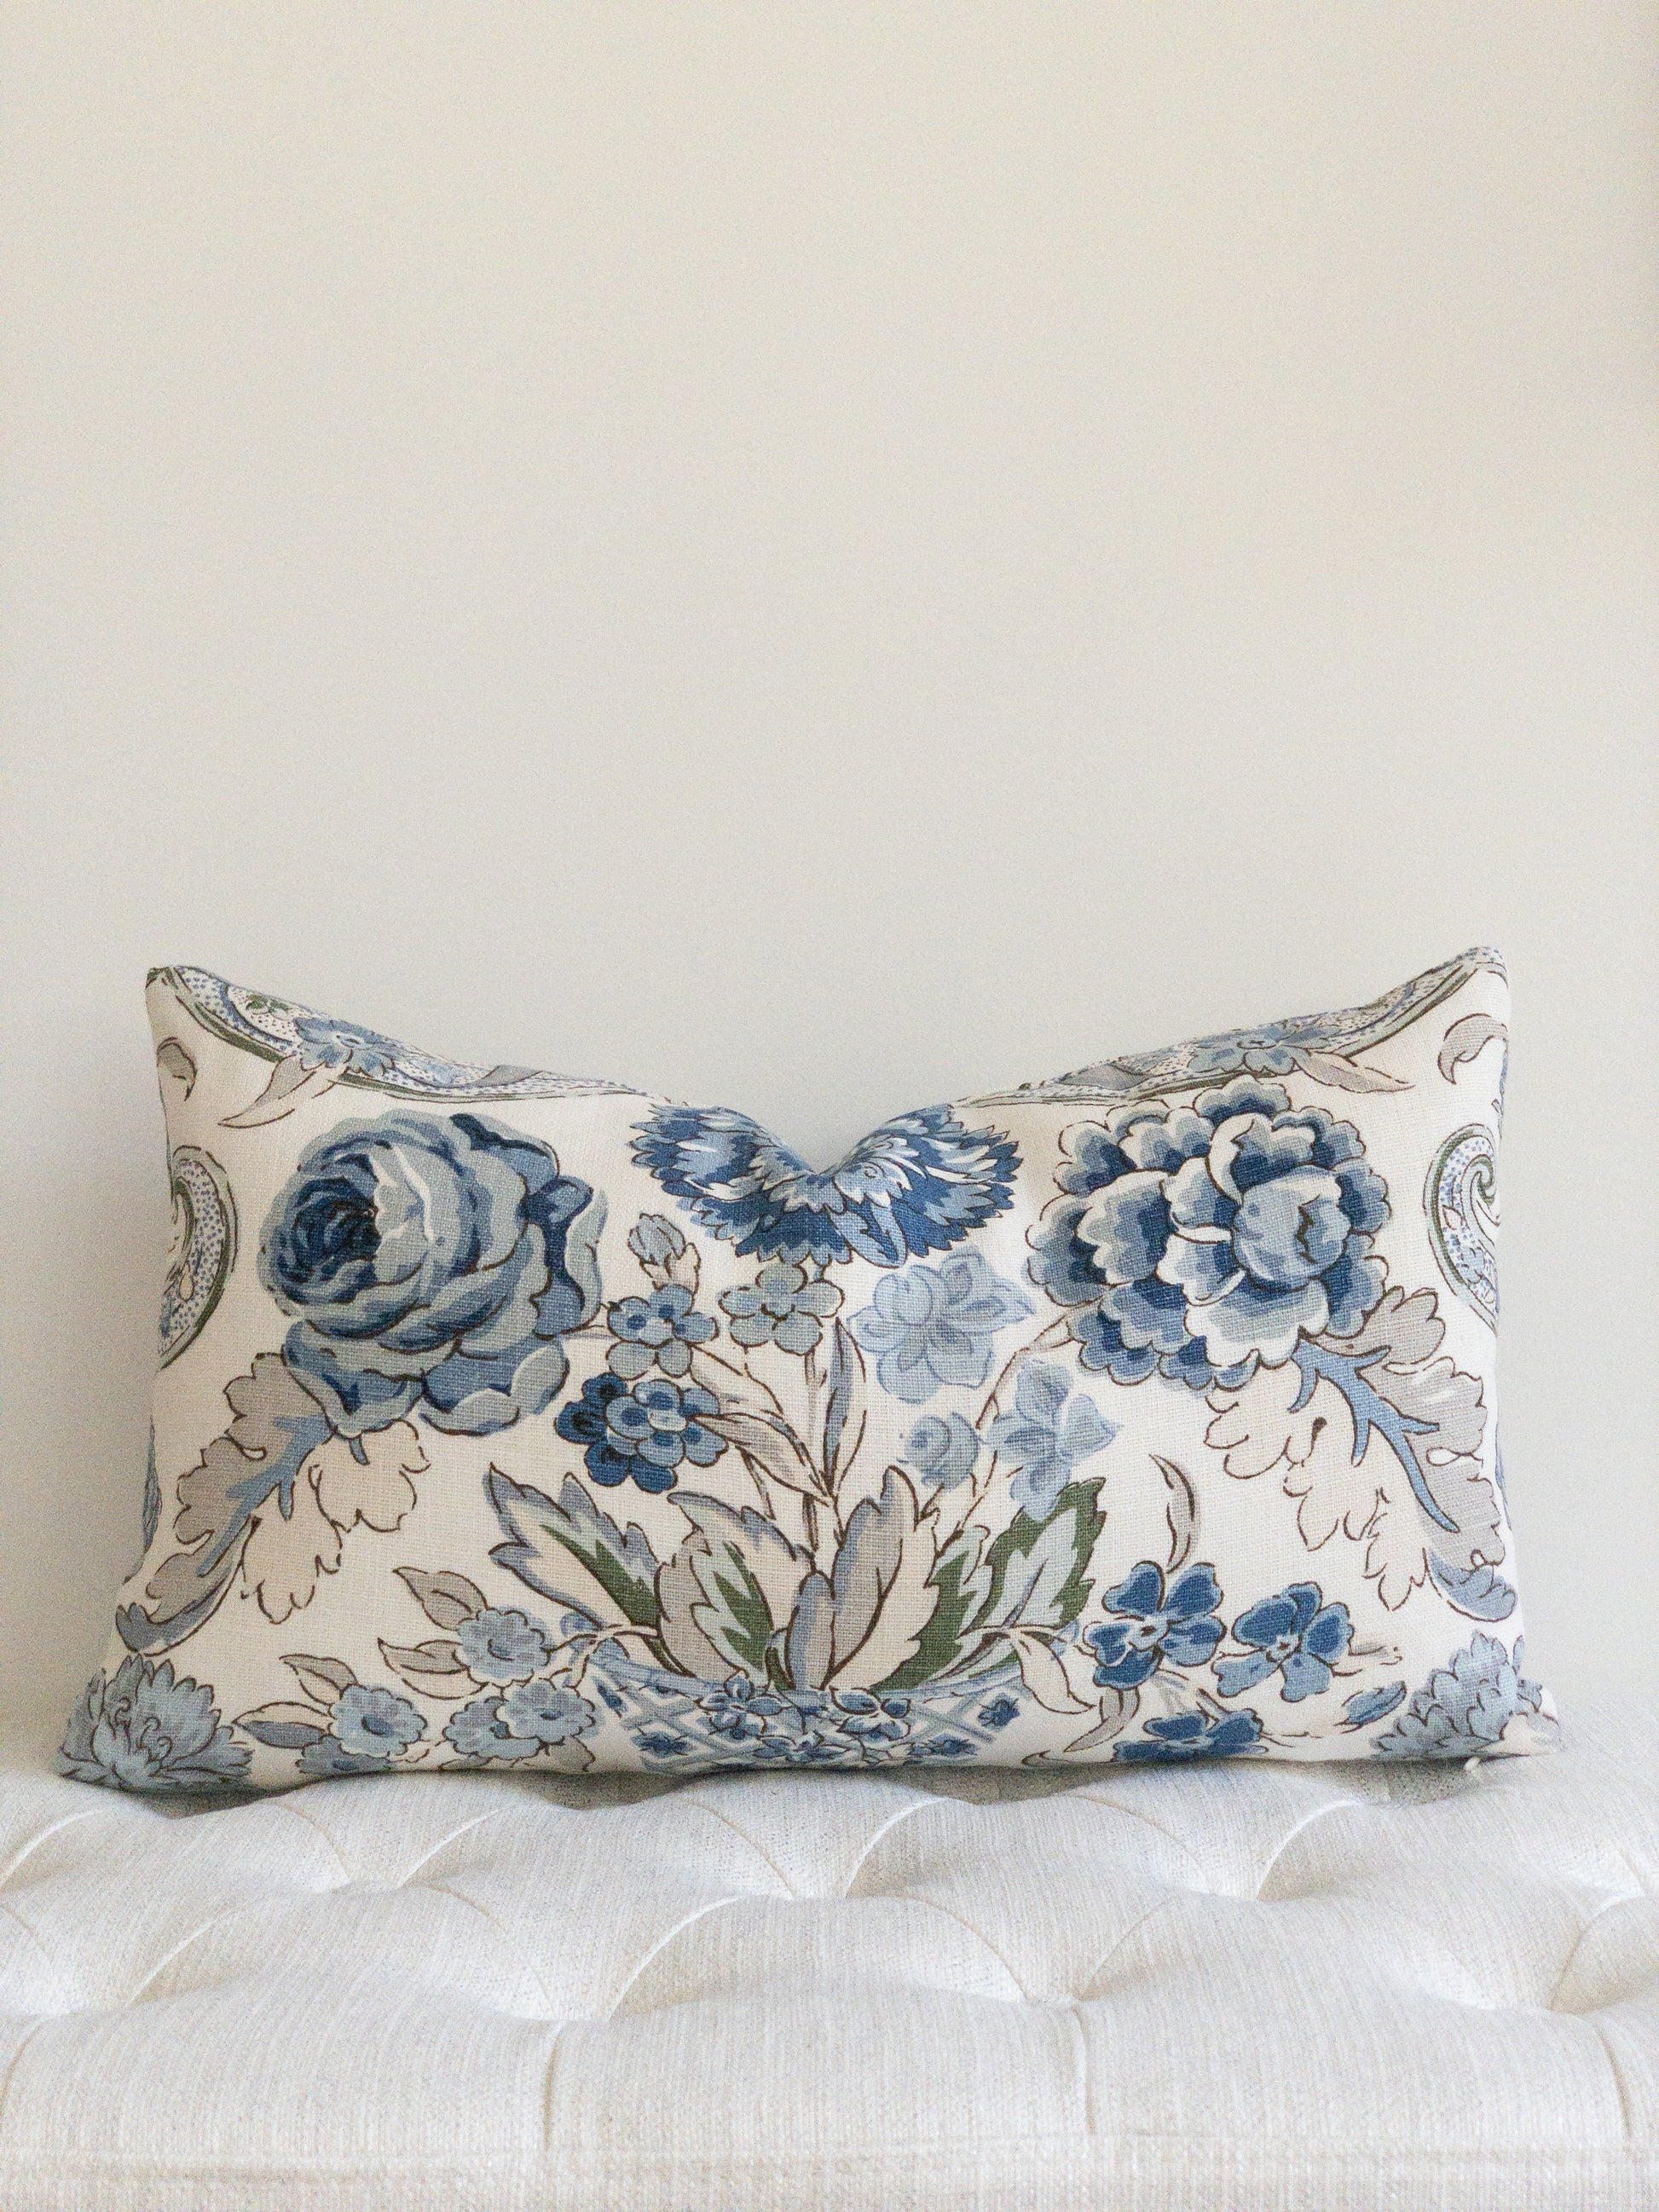 Blue and white designer floral lumbar pillow with large blue flowers